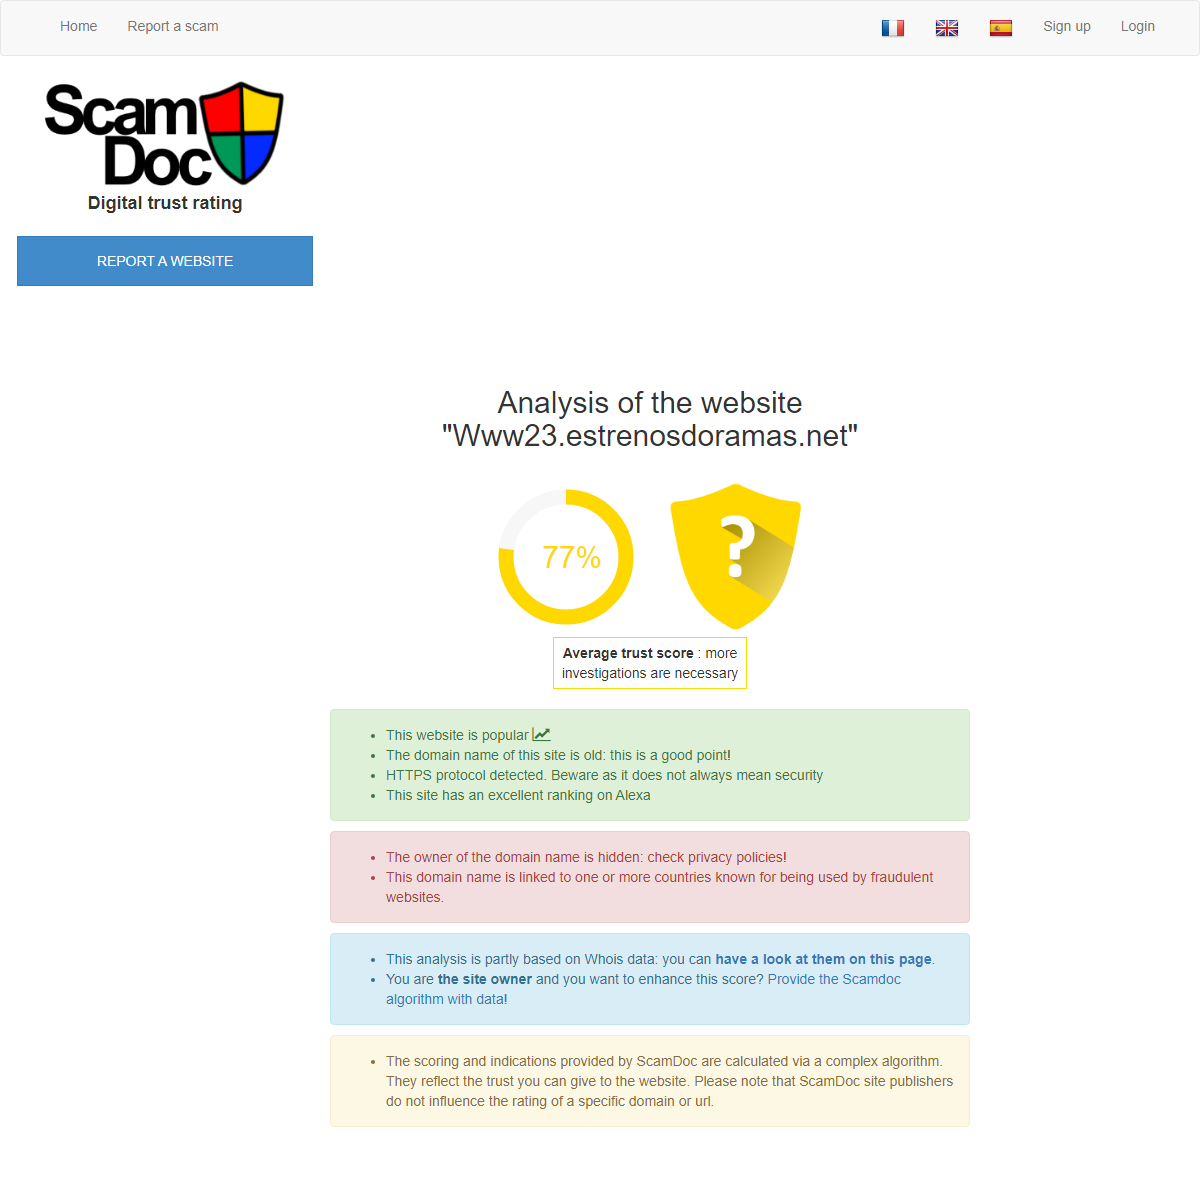 A complete backup of https://www.scamdoc.com/view/529657